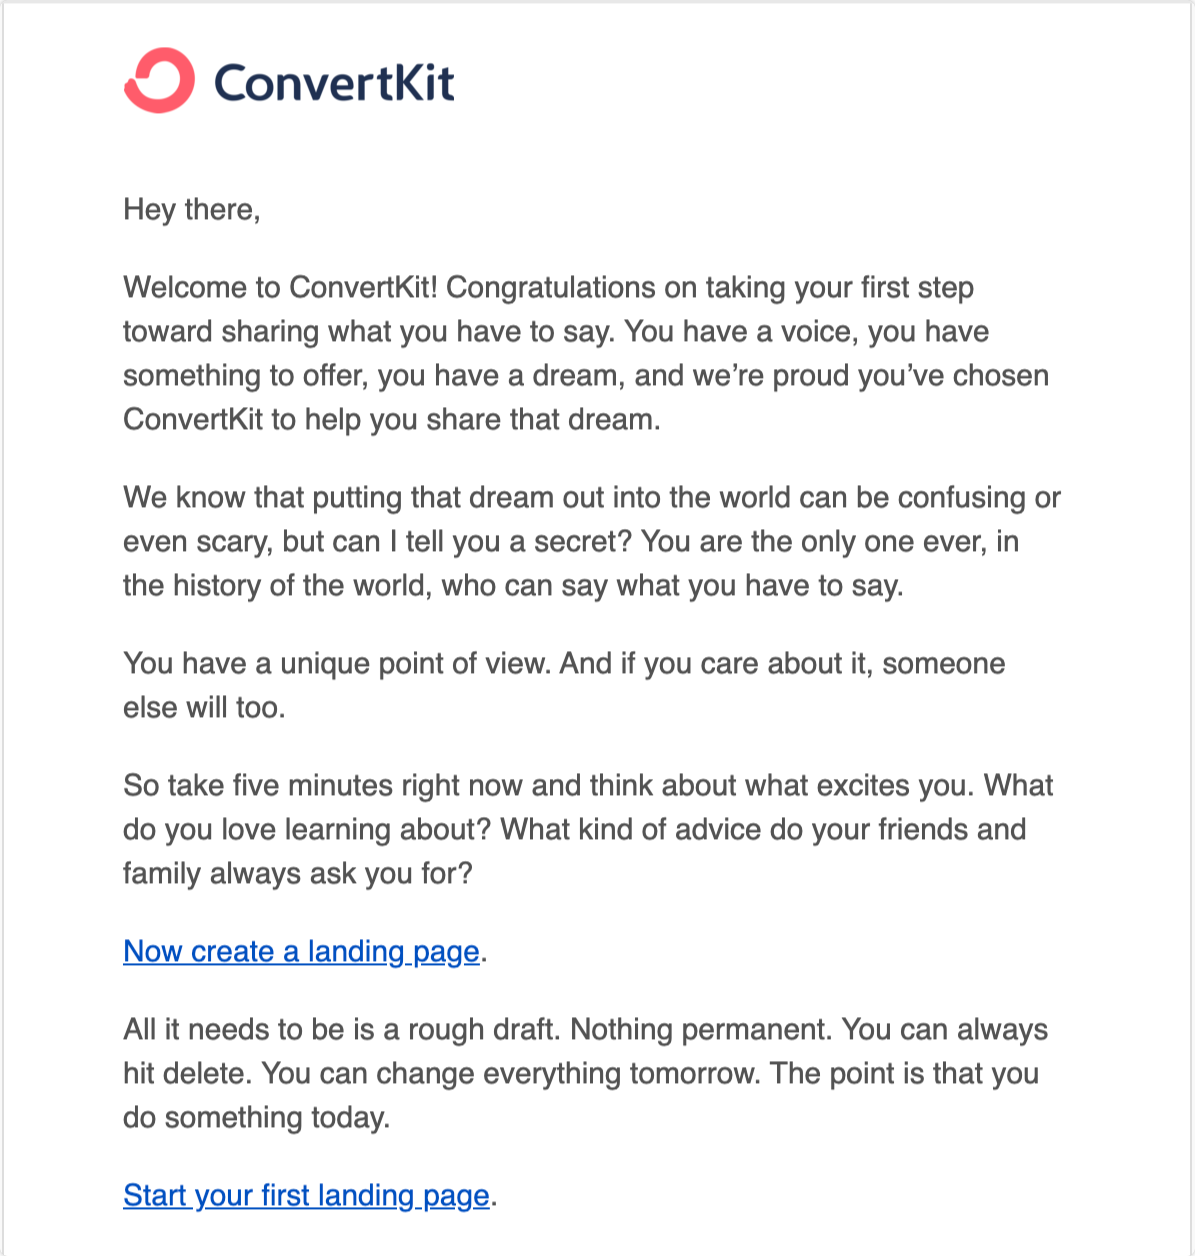 ConvertKit's welcome email that maps out the customer journey